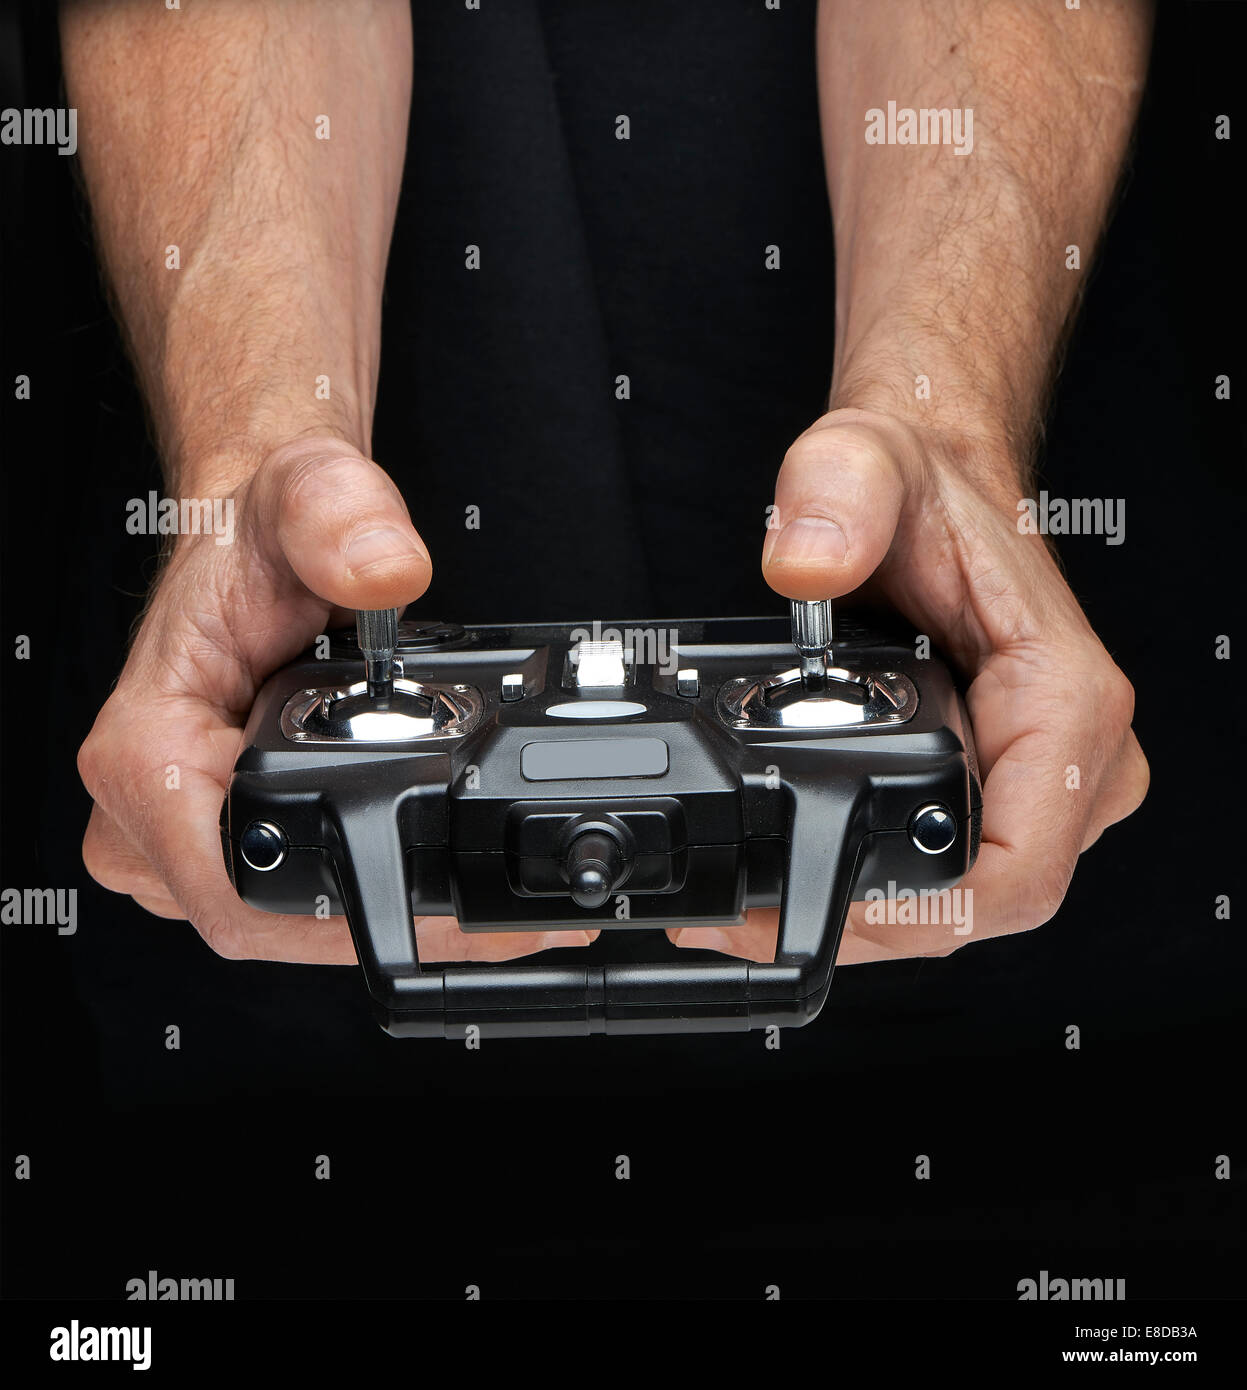 Hands manipulate the radio-control for toy Stock Photo